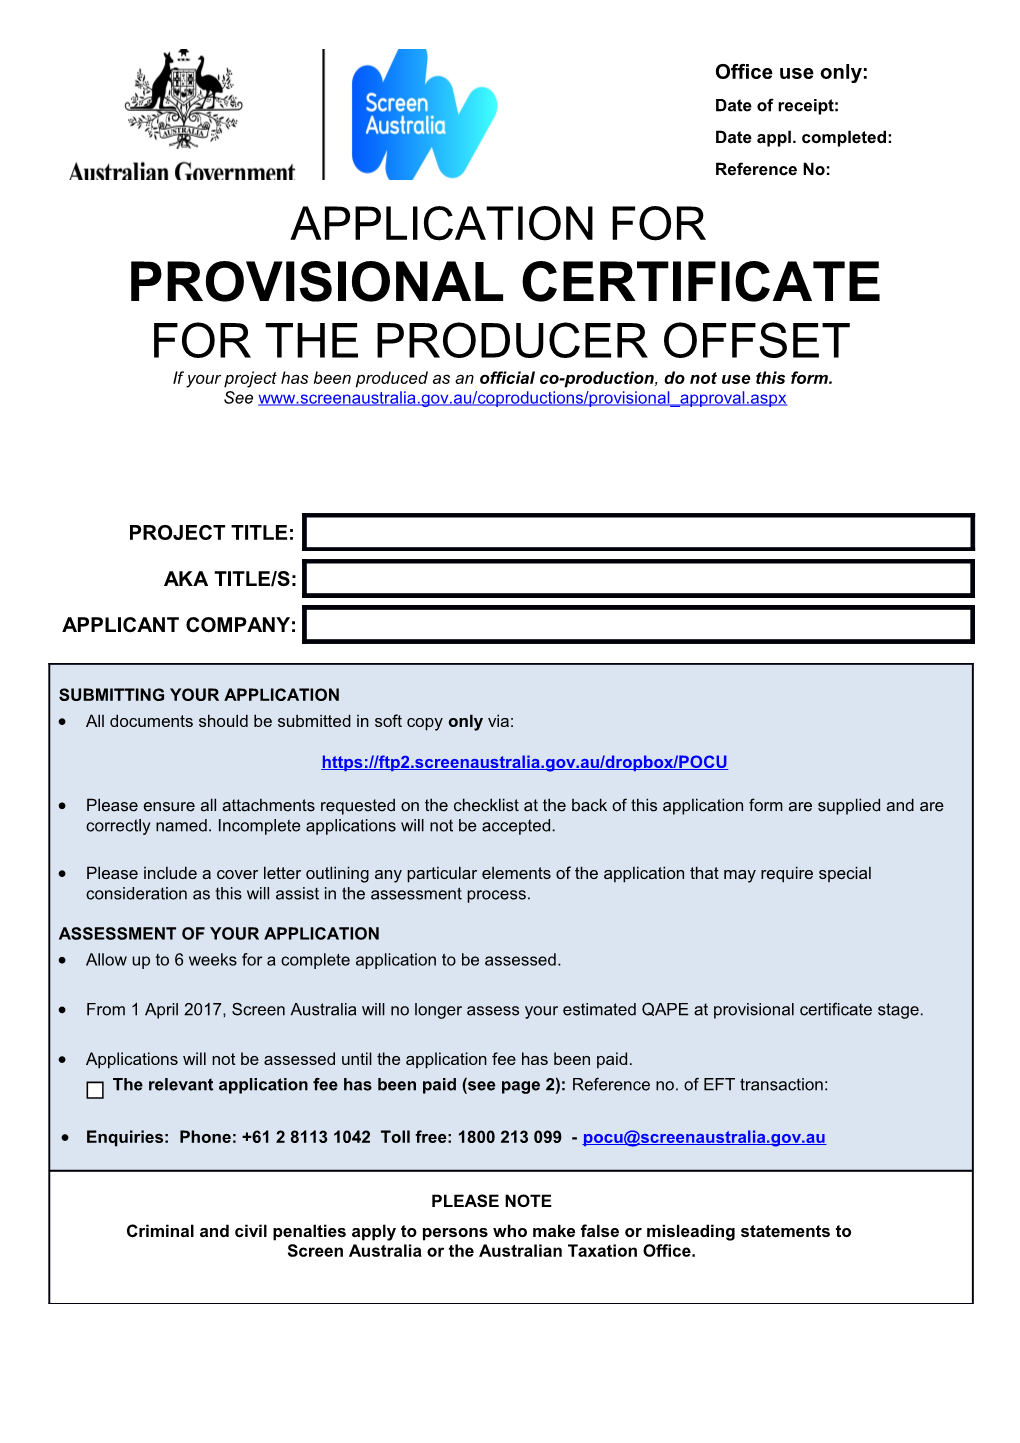 Producer Offset Provisional Certification Application